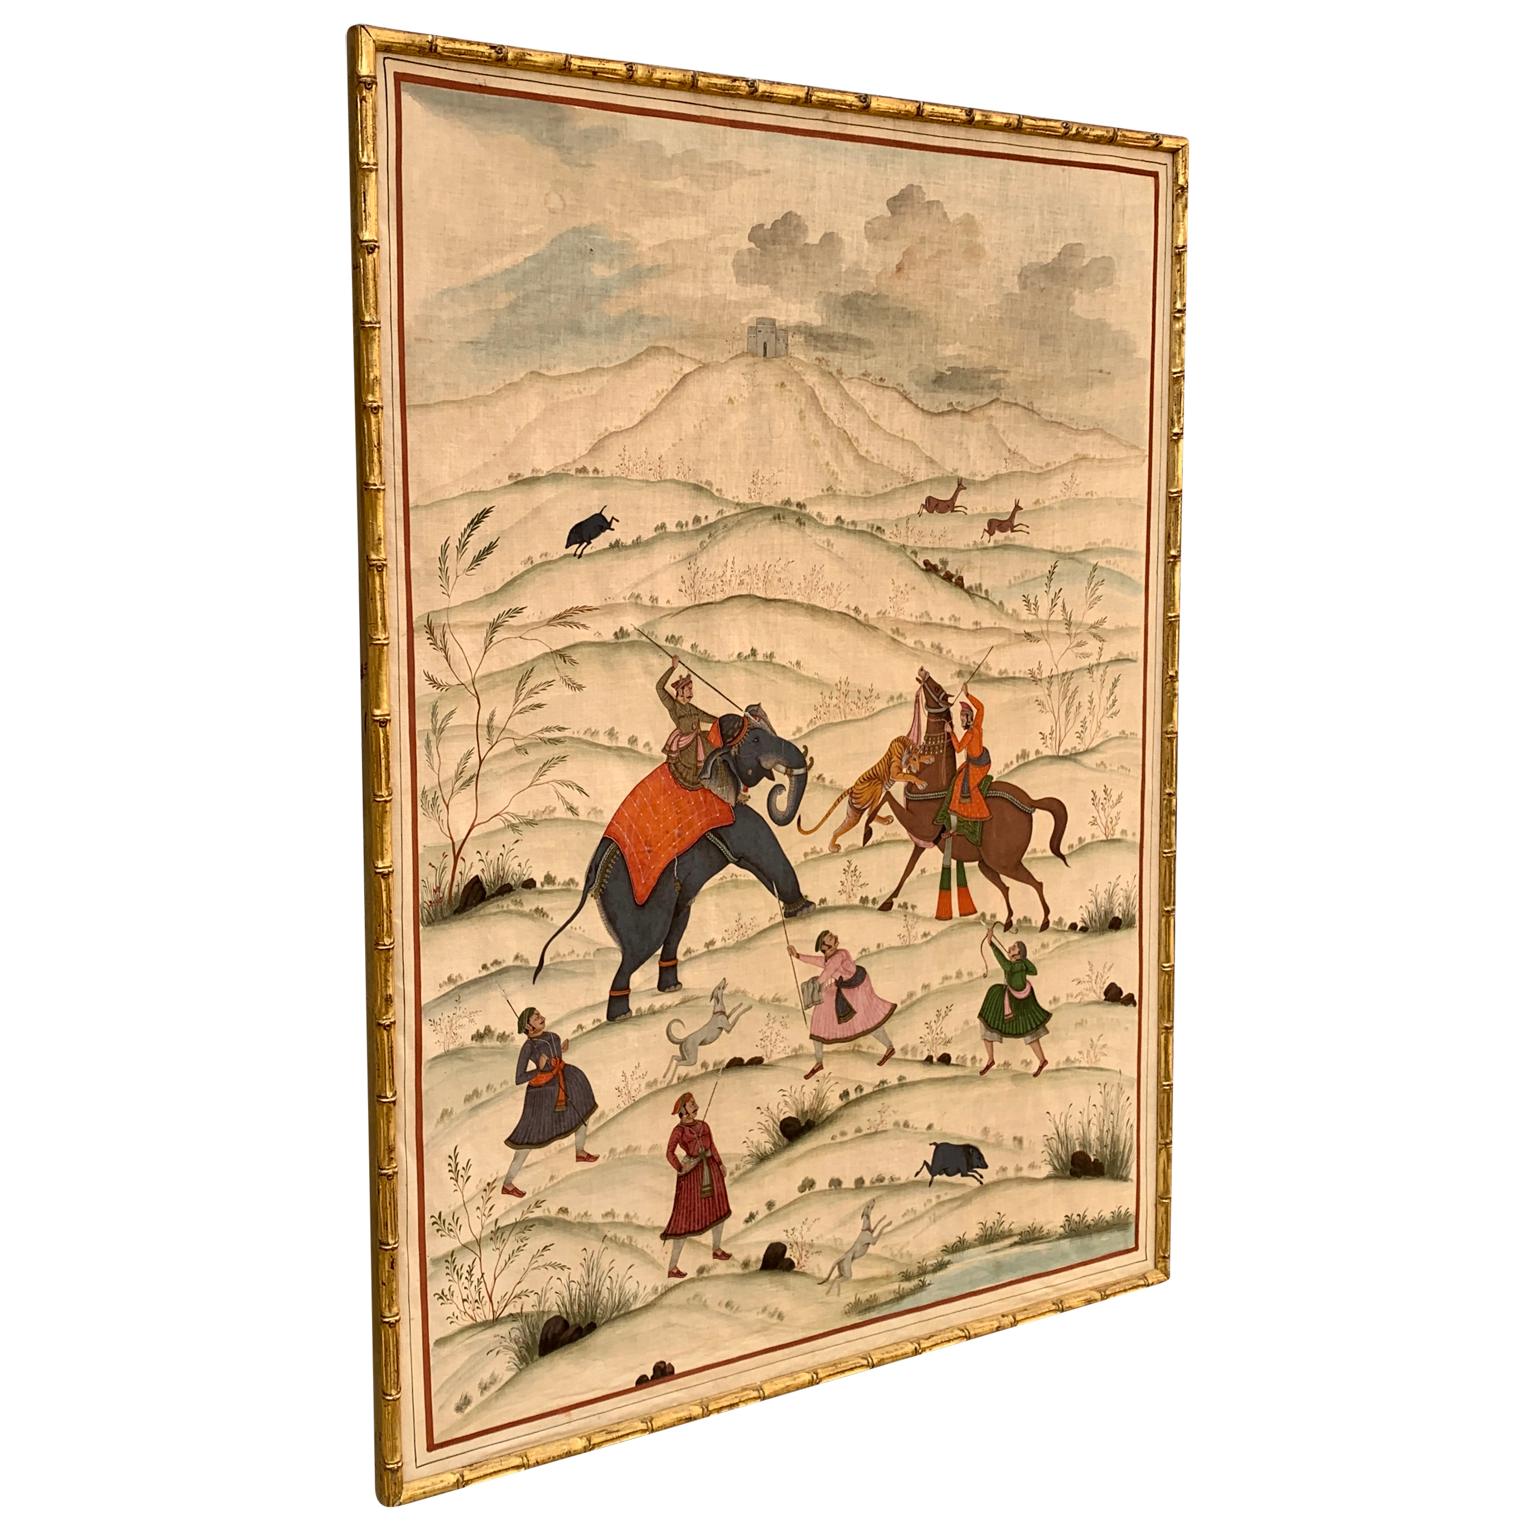 A hand-painted work of art on silk from former Persia or India representing a tiger hunt in a wild hill landscape. Framed in a gilt bamboo imitation matching frame uptight on a panel. Animals in this scene include elephants, tiger, wild boars, dogs,